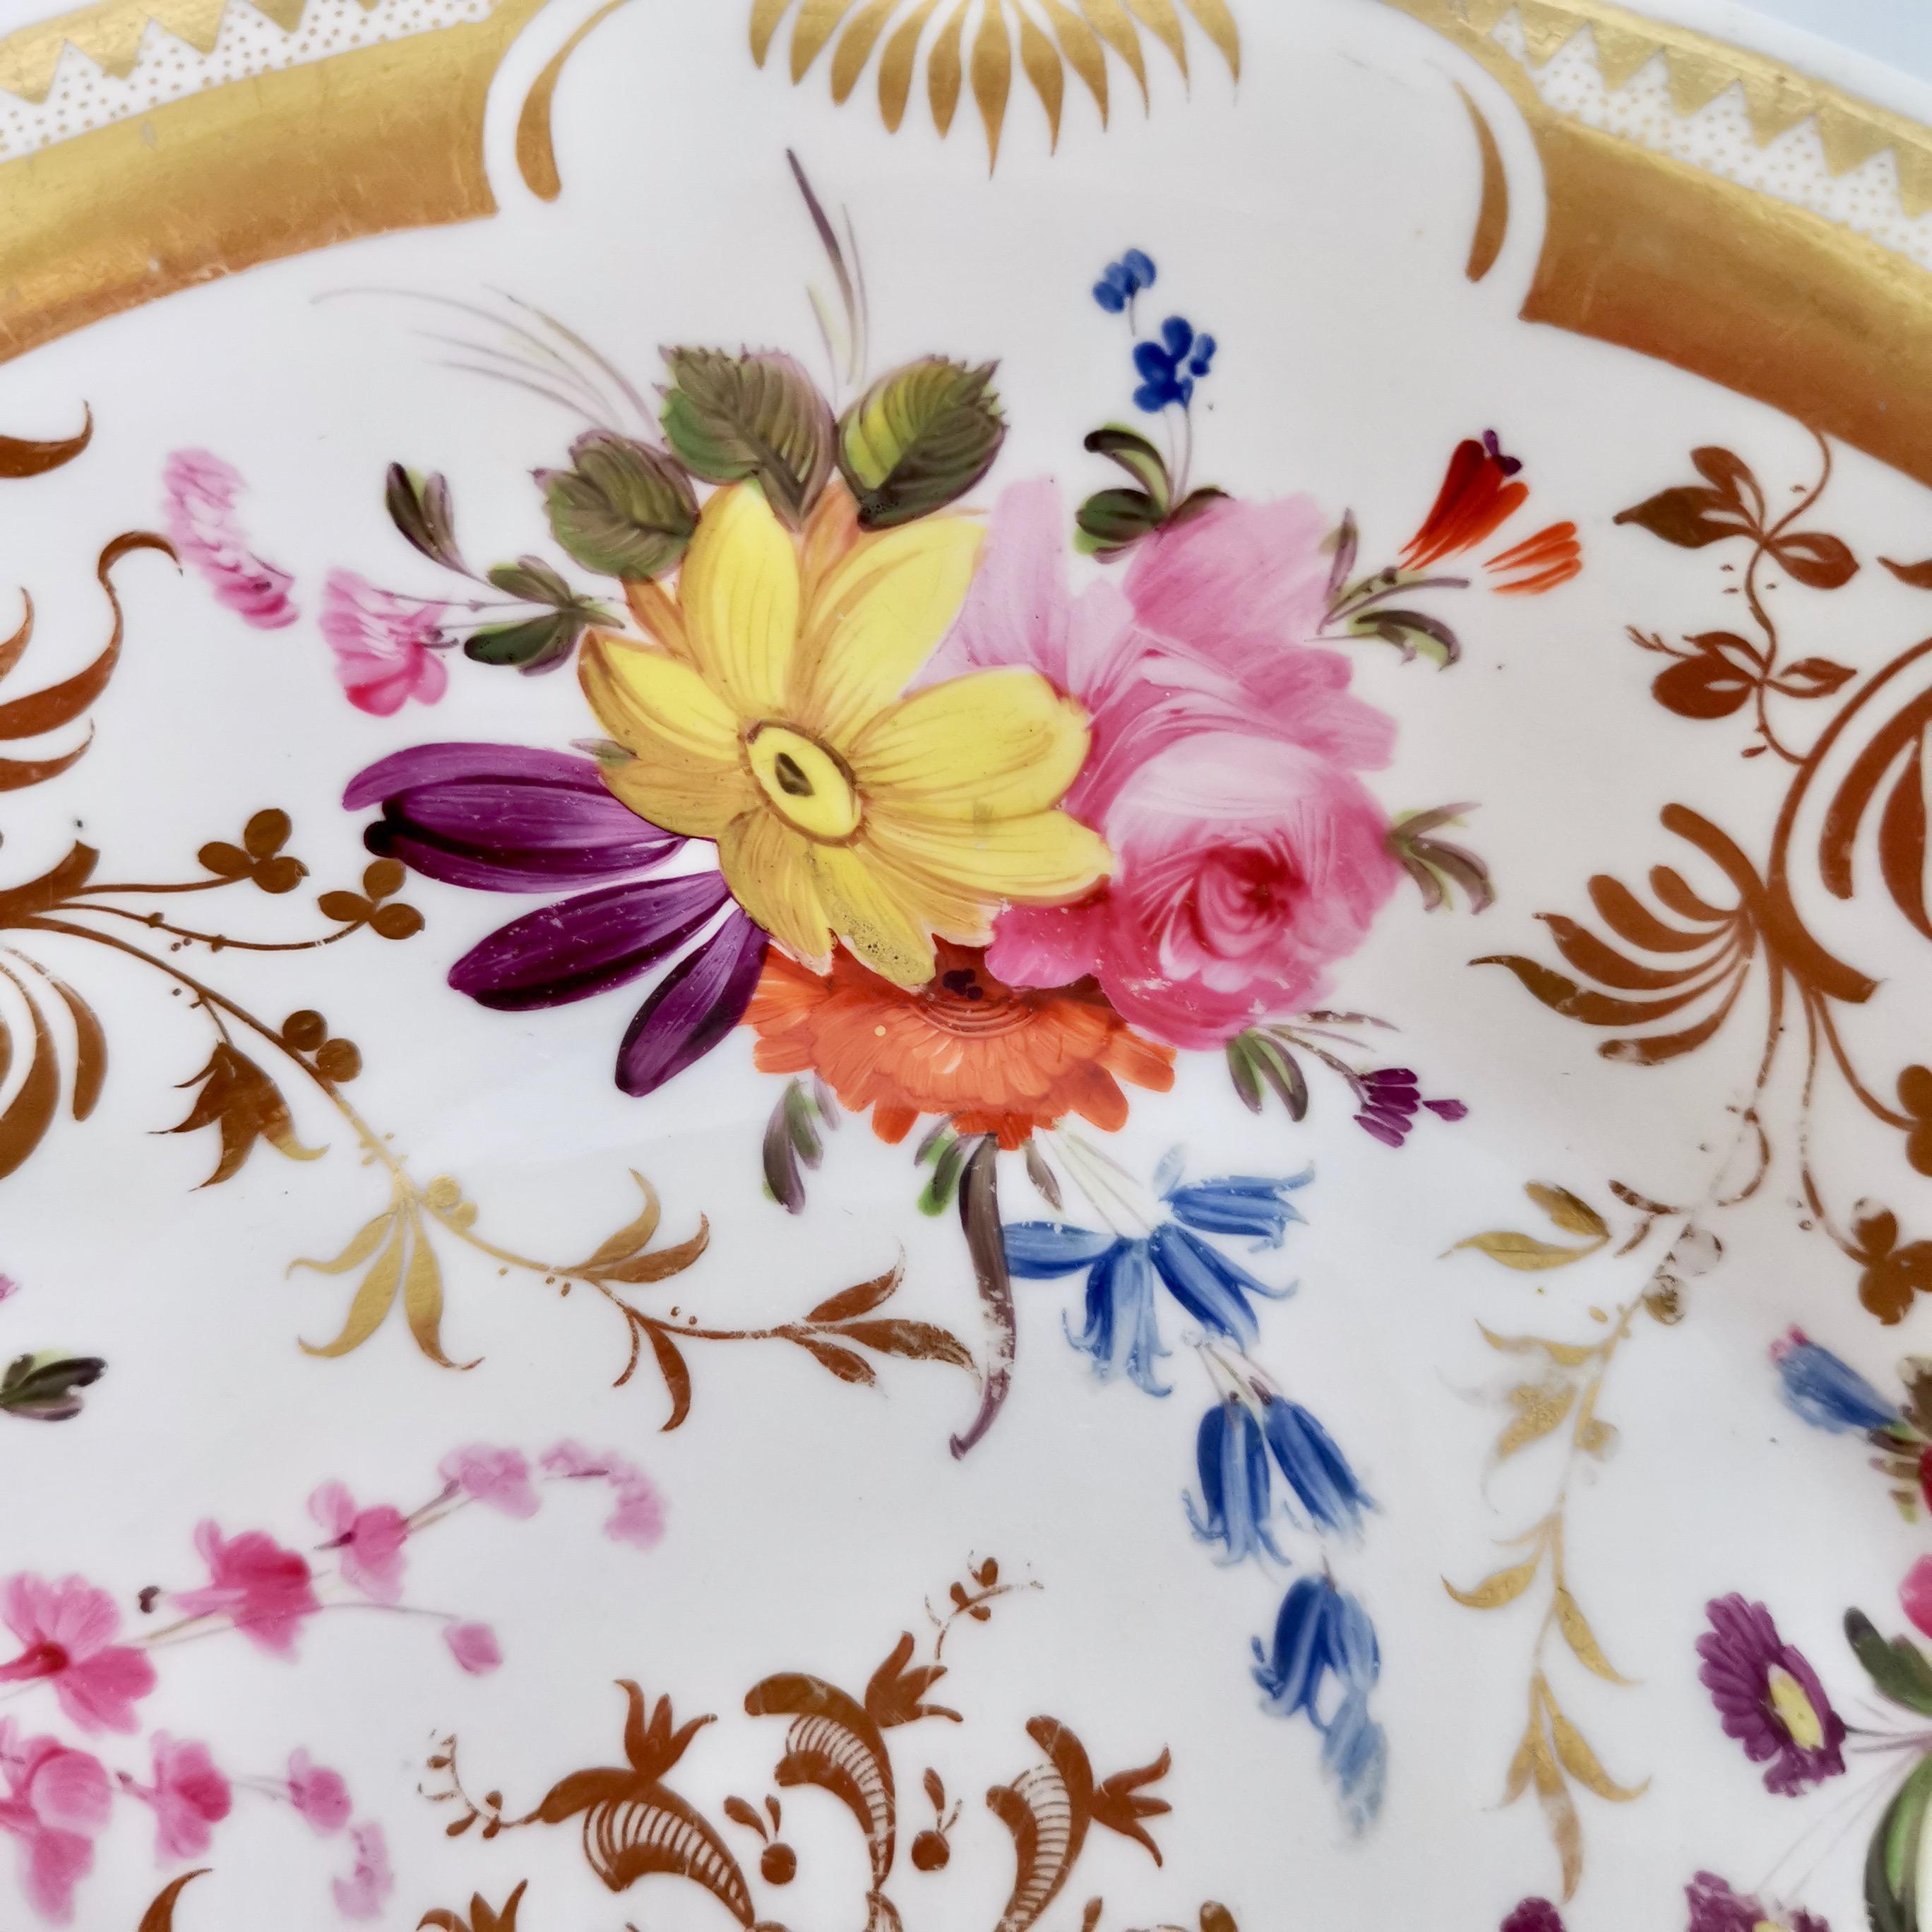 This is a beautiful plate made by Davenport in about 1820. The plate has a striking and rich gilt pattern on a white ground, with beautifully hand painted flower sprays. The plate might be a 